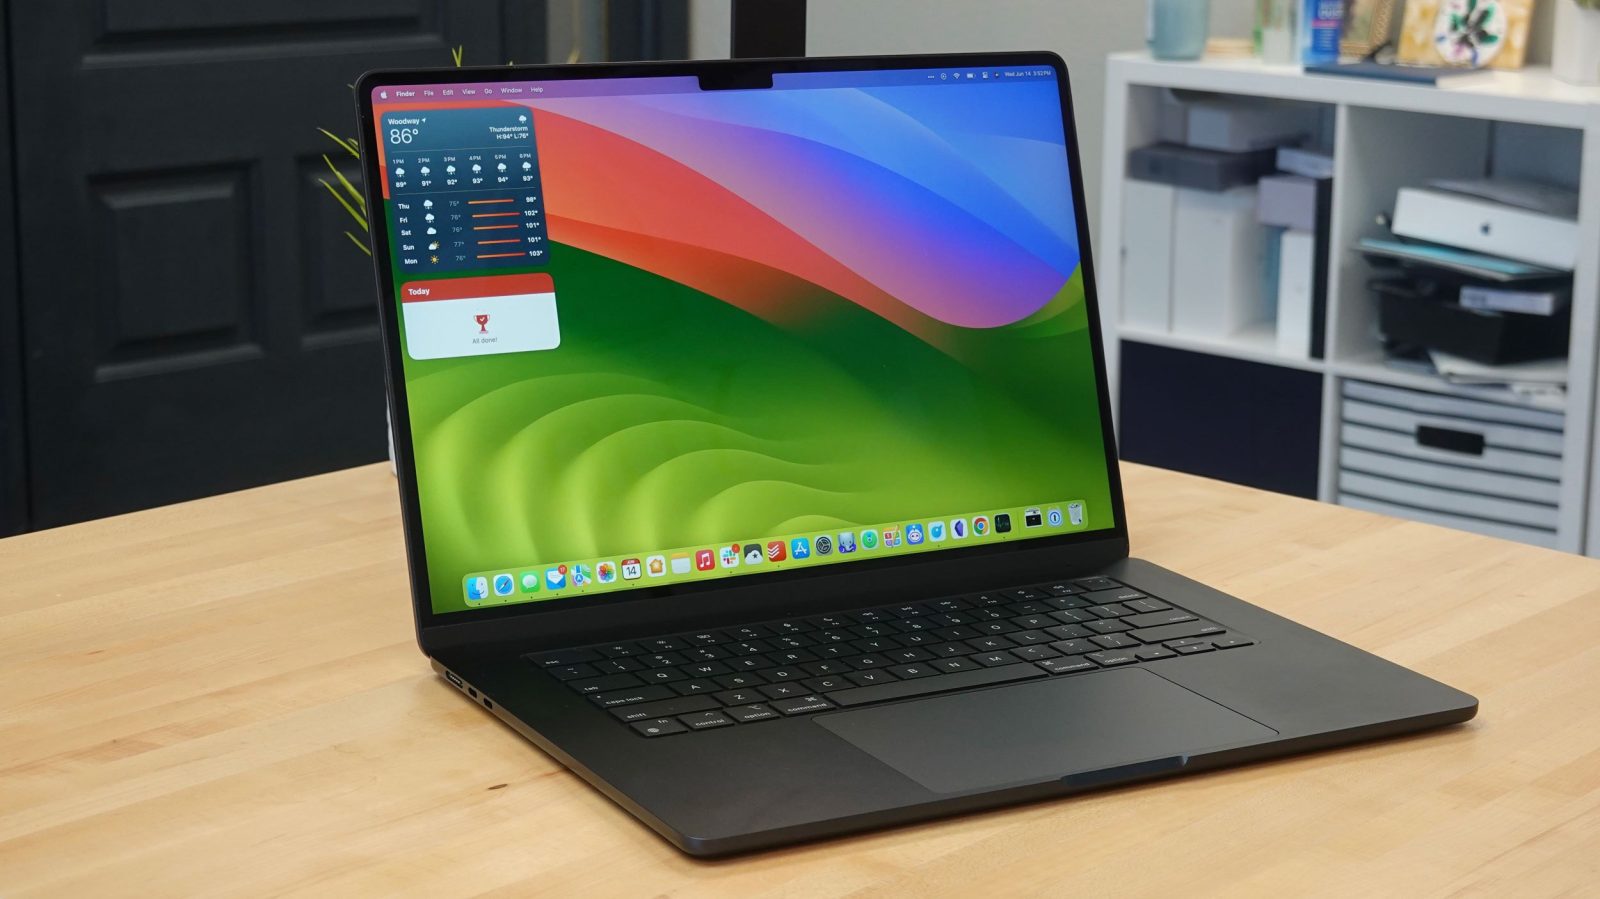 Intel prevented Apple from making a 15-inch MacBook Air: “It just did not  say \'Air\' to us” - 9to5Mac